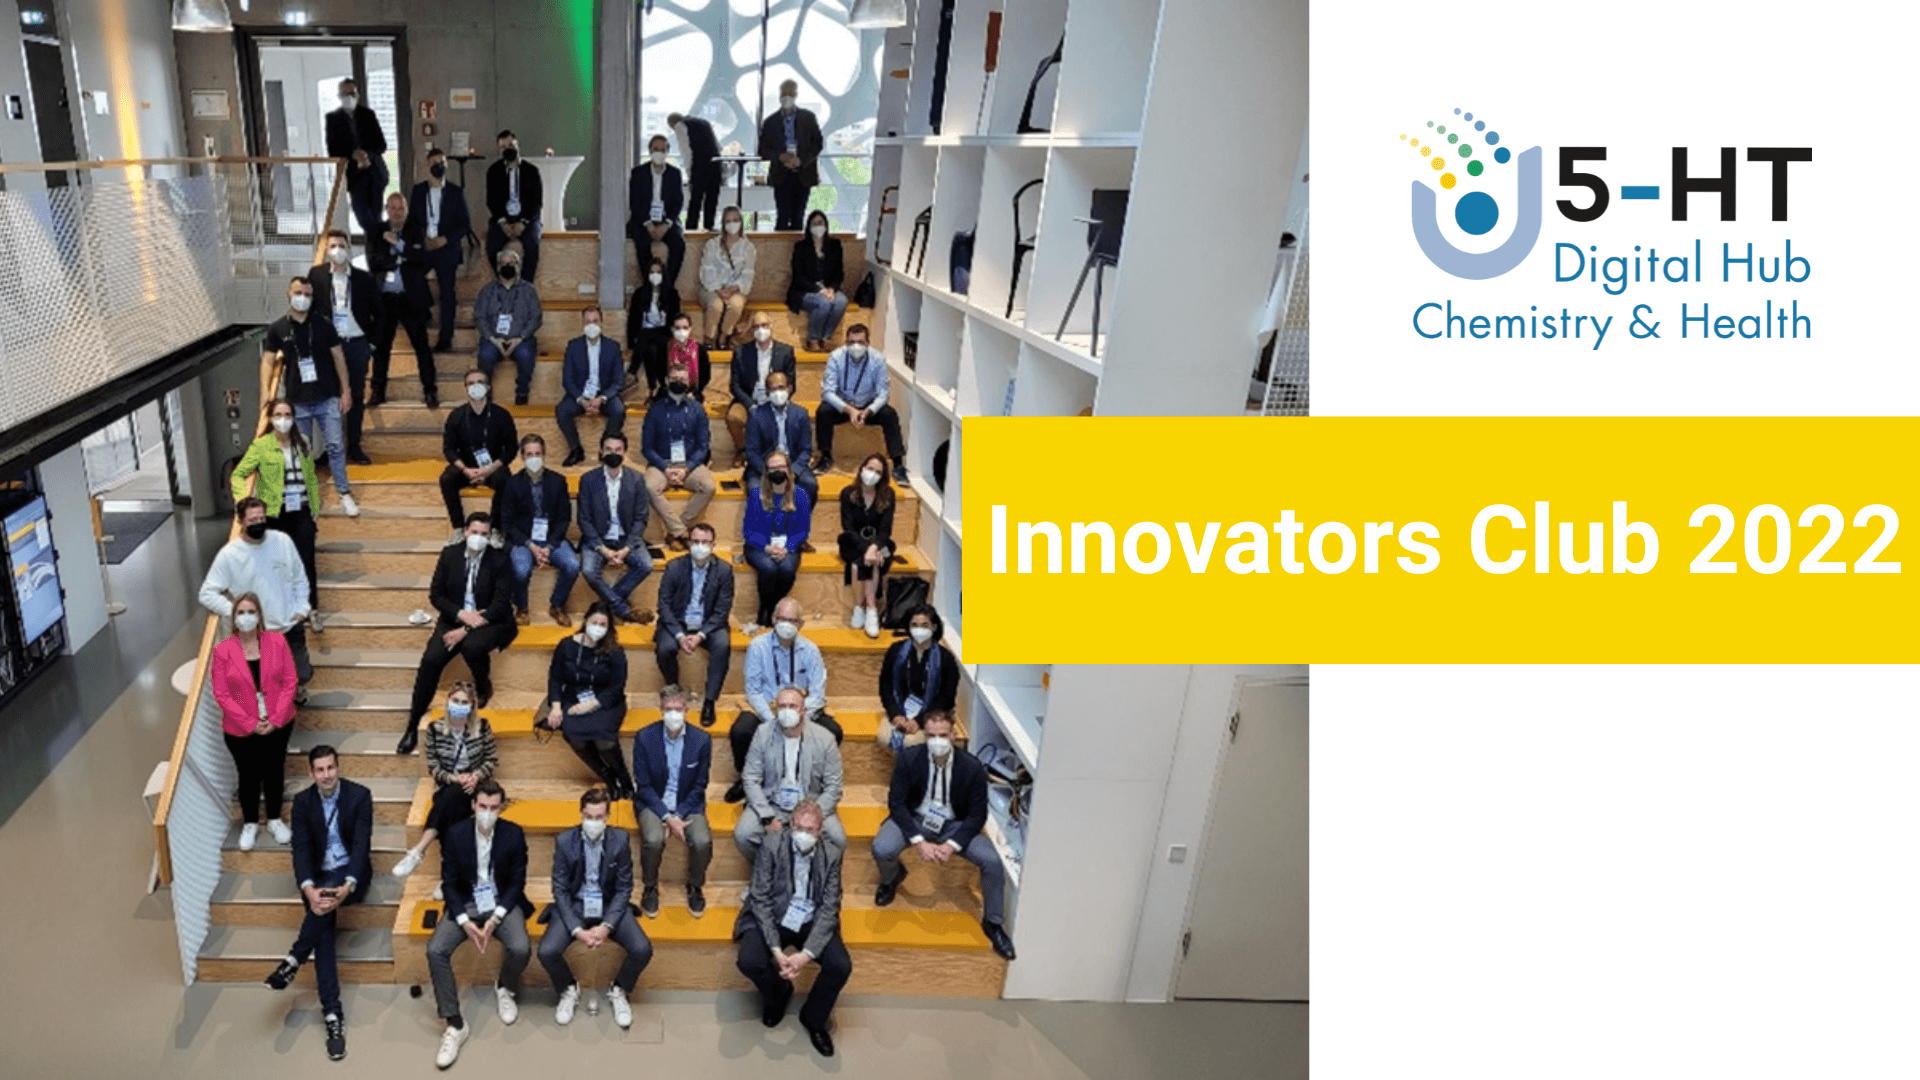 5-HT Innovators Club - Enabling External Innovation in the Chemical and Pharmaceutical Industries